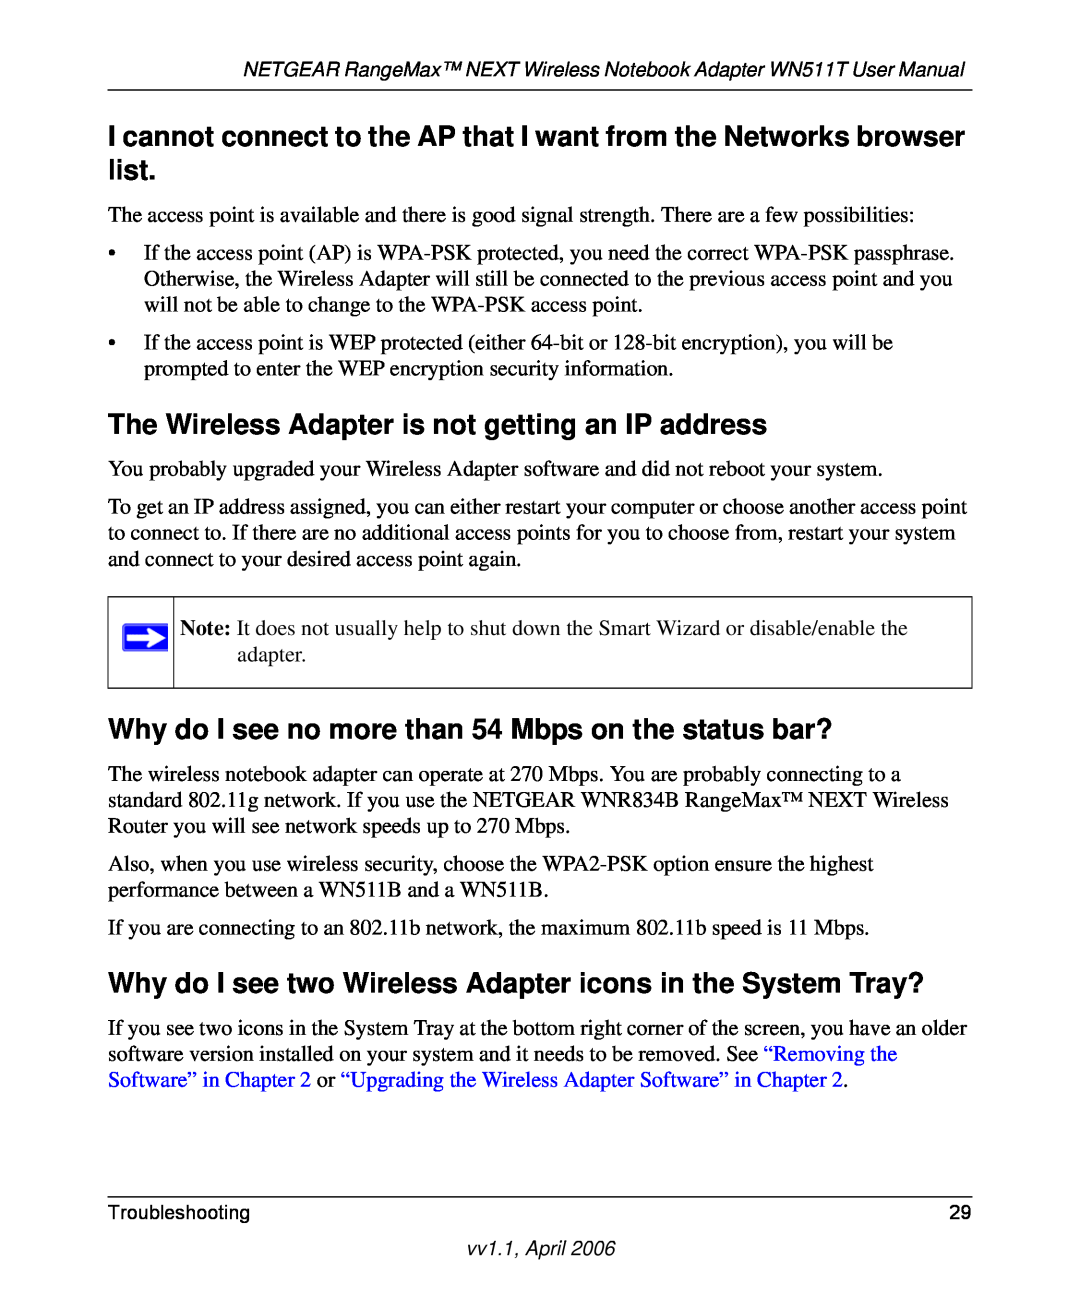 NETGEAR WN511T user manual I cannot connect to the AP that I want from the Networks browser list 